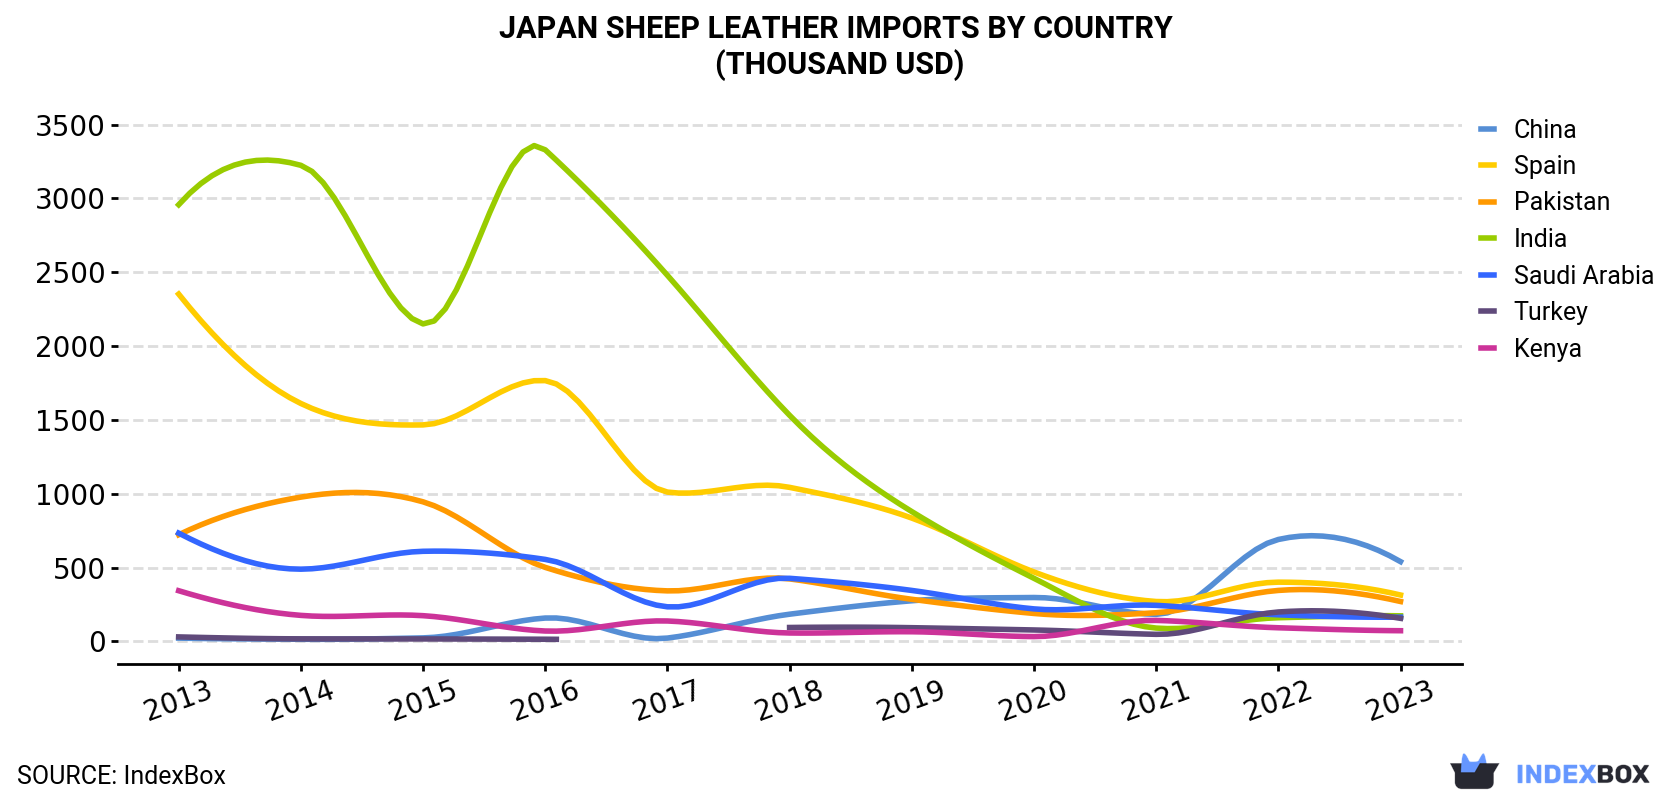 Japan Sheep Leather Imports By Country (Thousand USD)